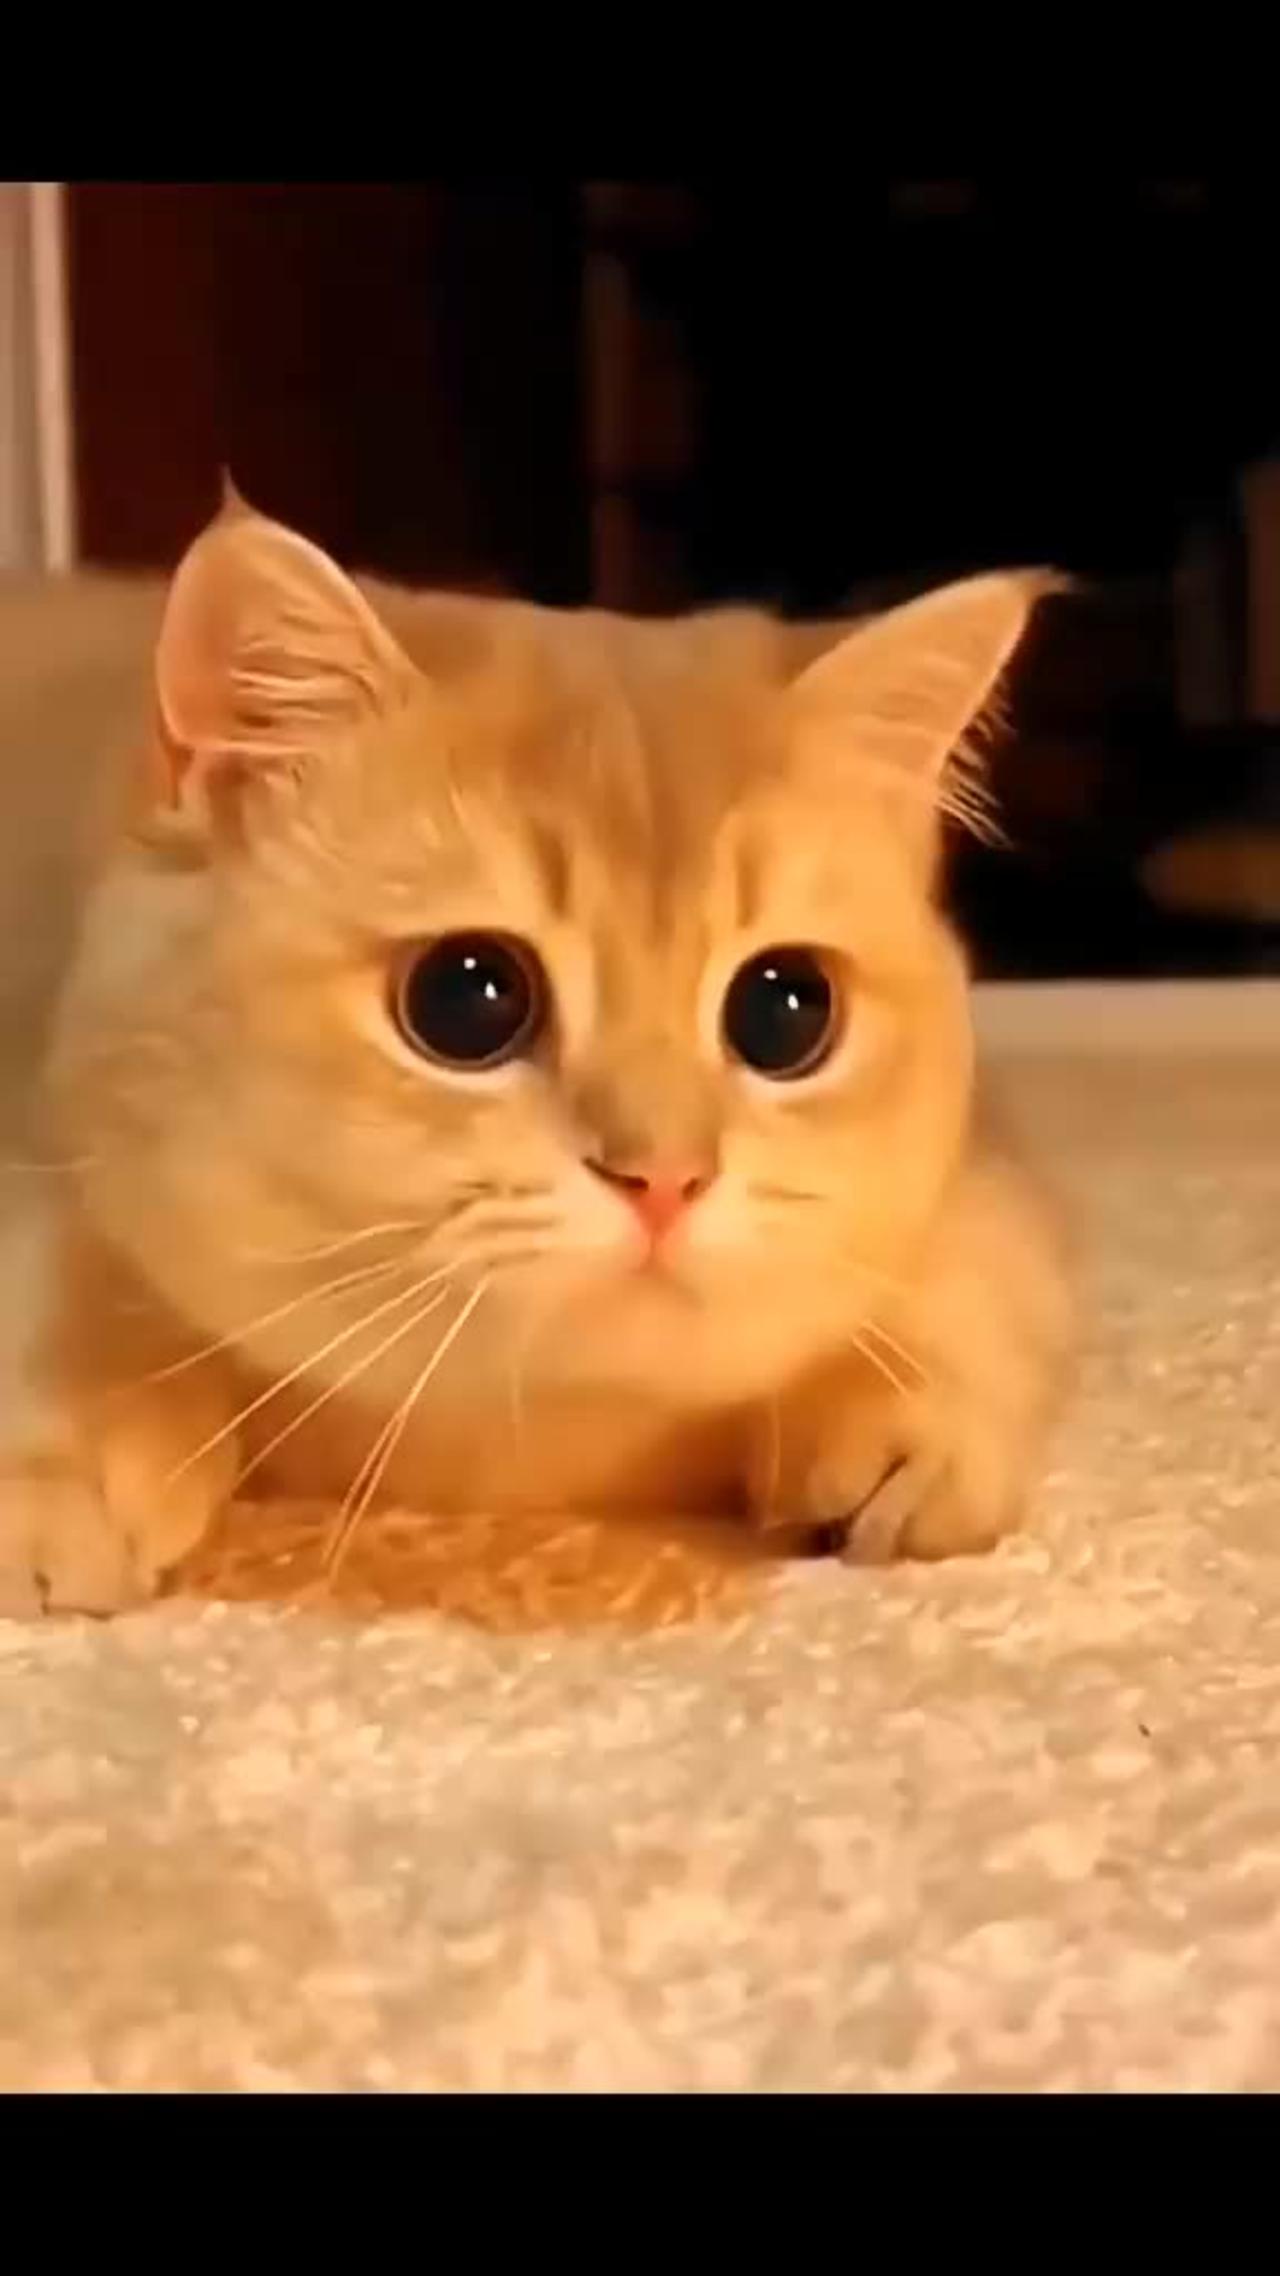 Hilarious Pet Videos that Brightened My Day!